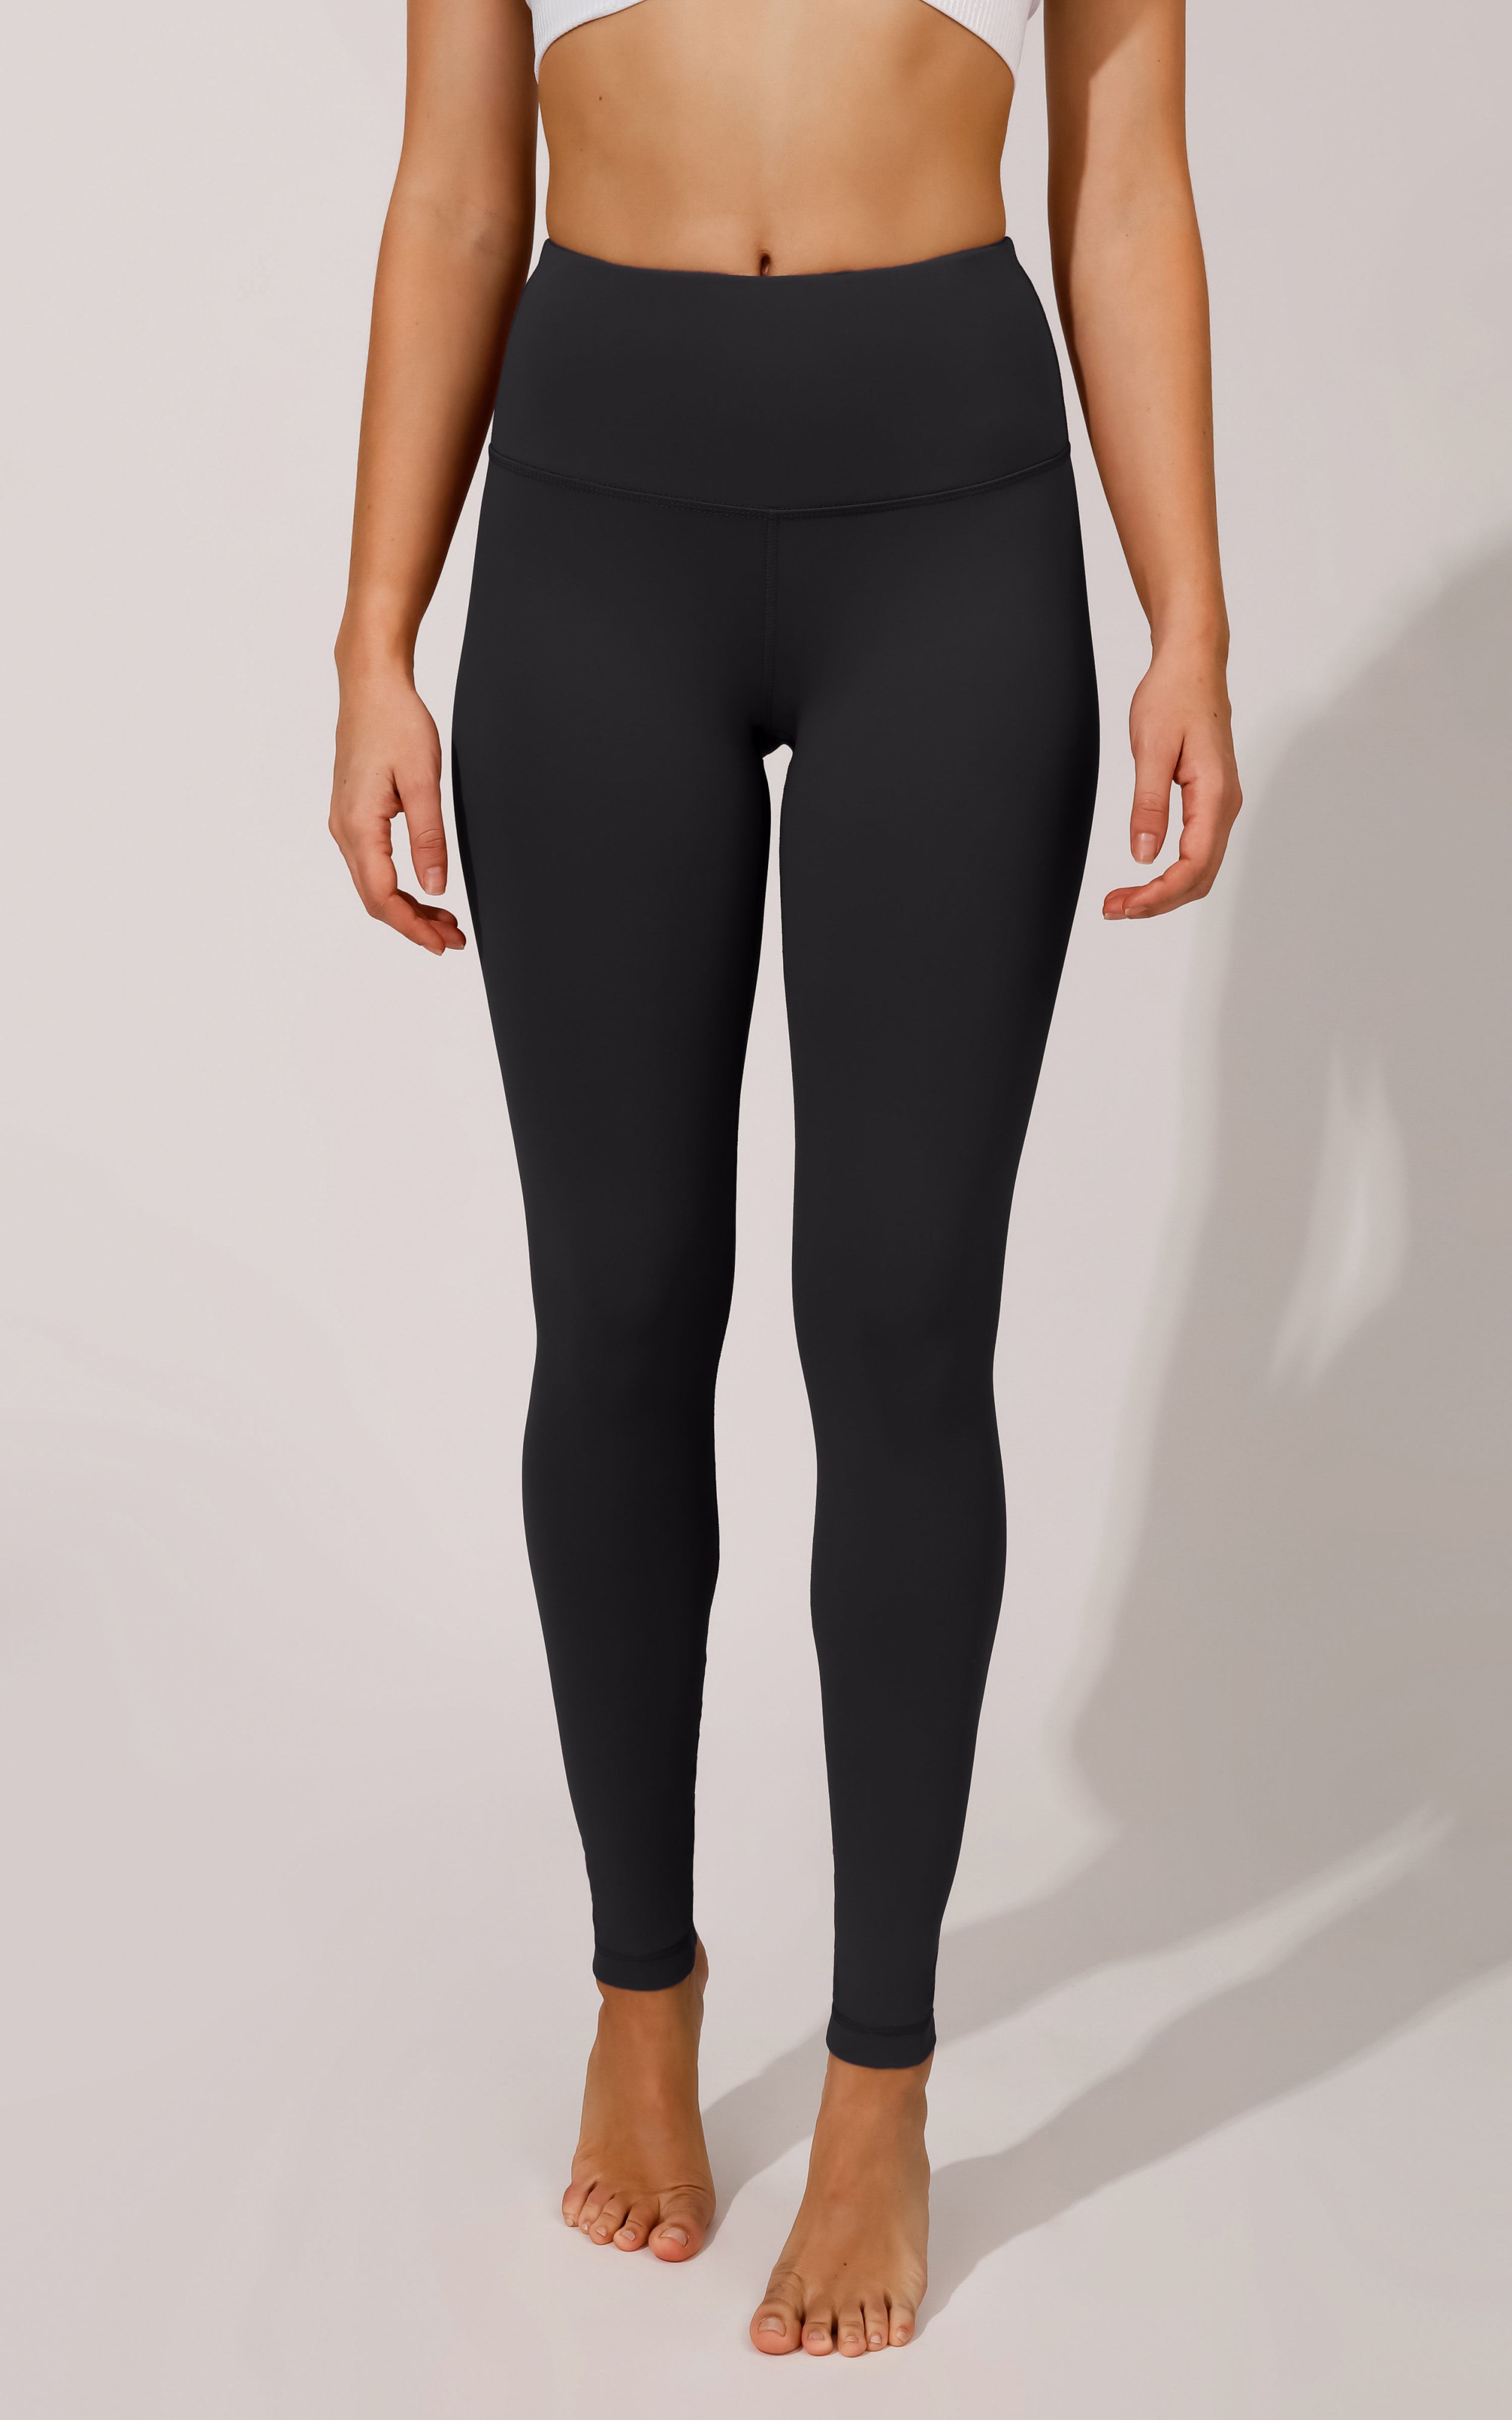  90 Degree By Reflex High Waist Tummy Control Interlink Squat  Proof Ankle Length Leggings - MulledBasil - XS : Clothing, Shoes & Jewelry